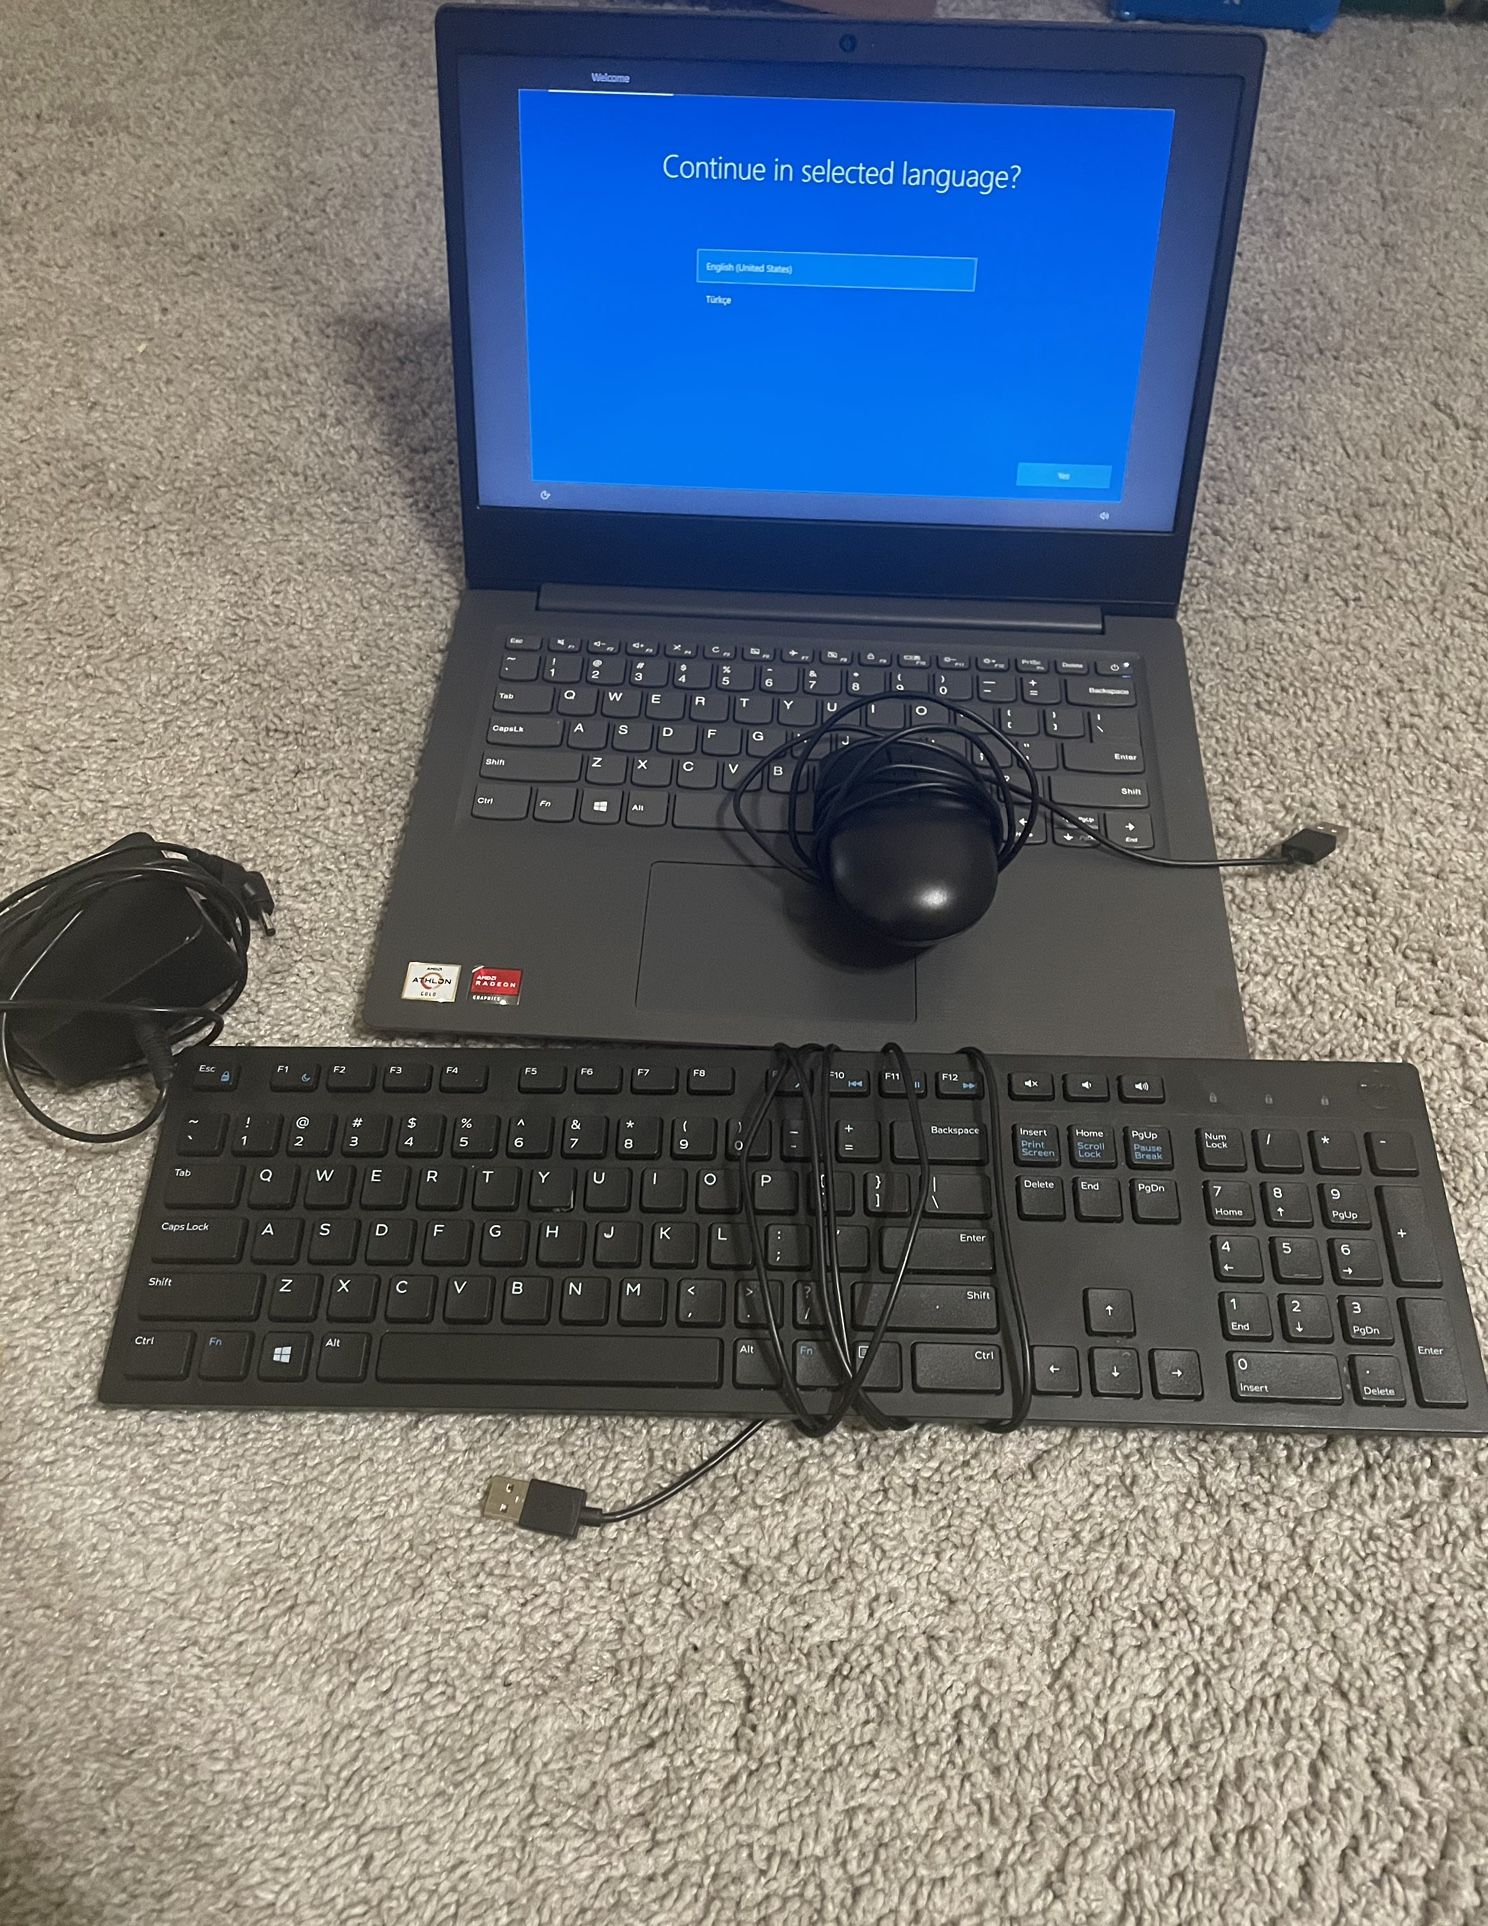 lenovo laptop with mouse and keyboard and charger